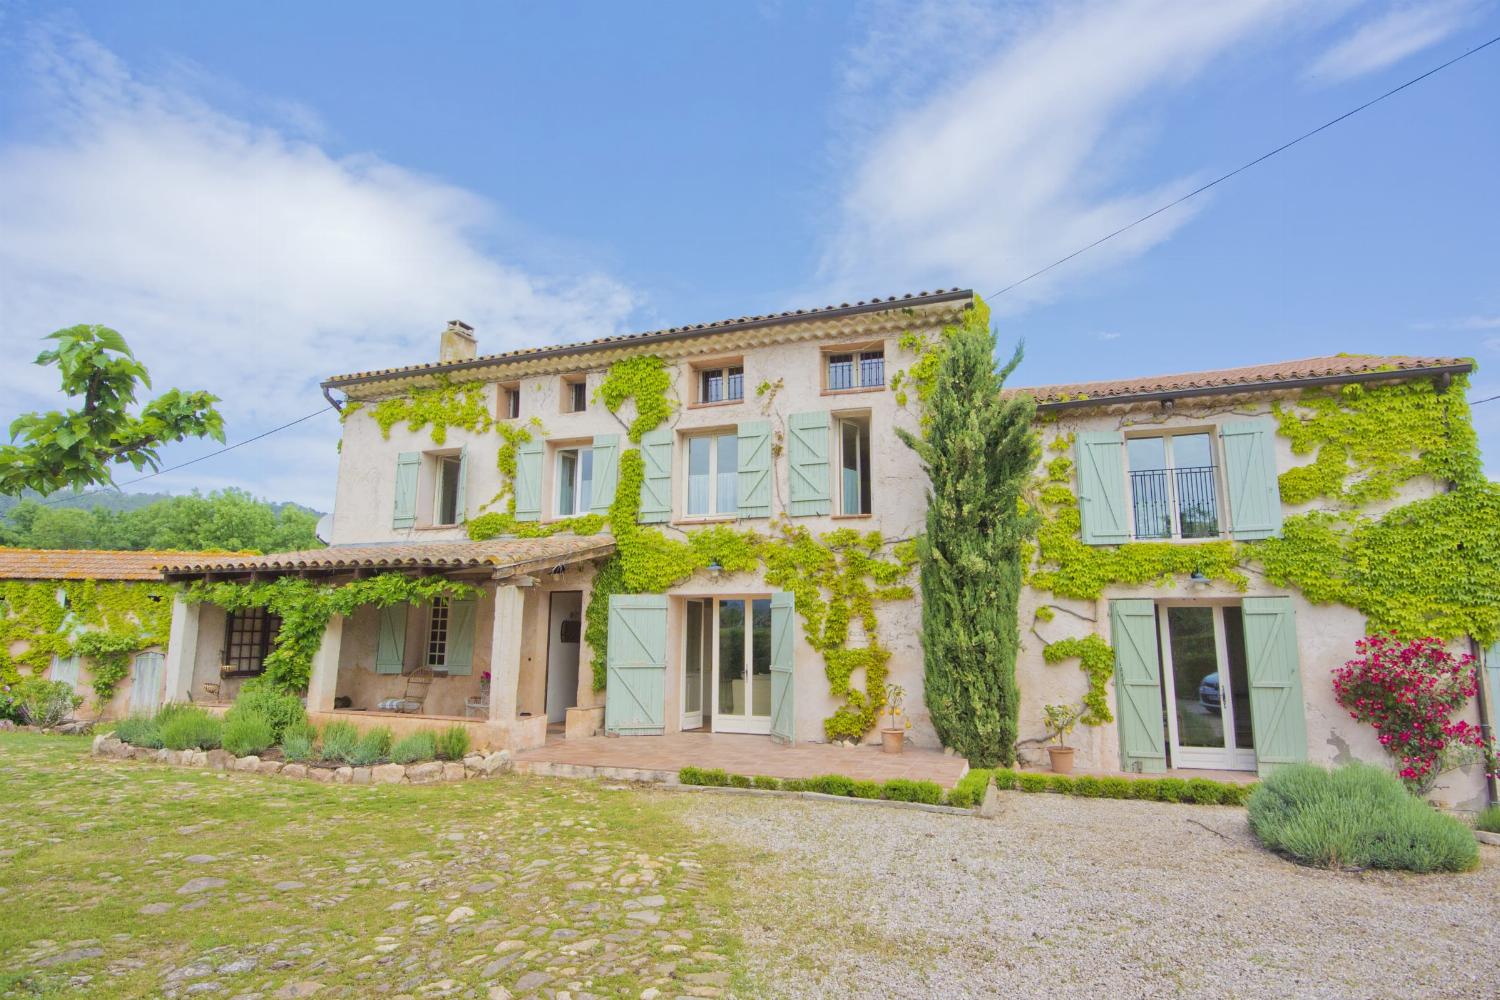 Rental home in Provence